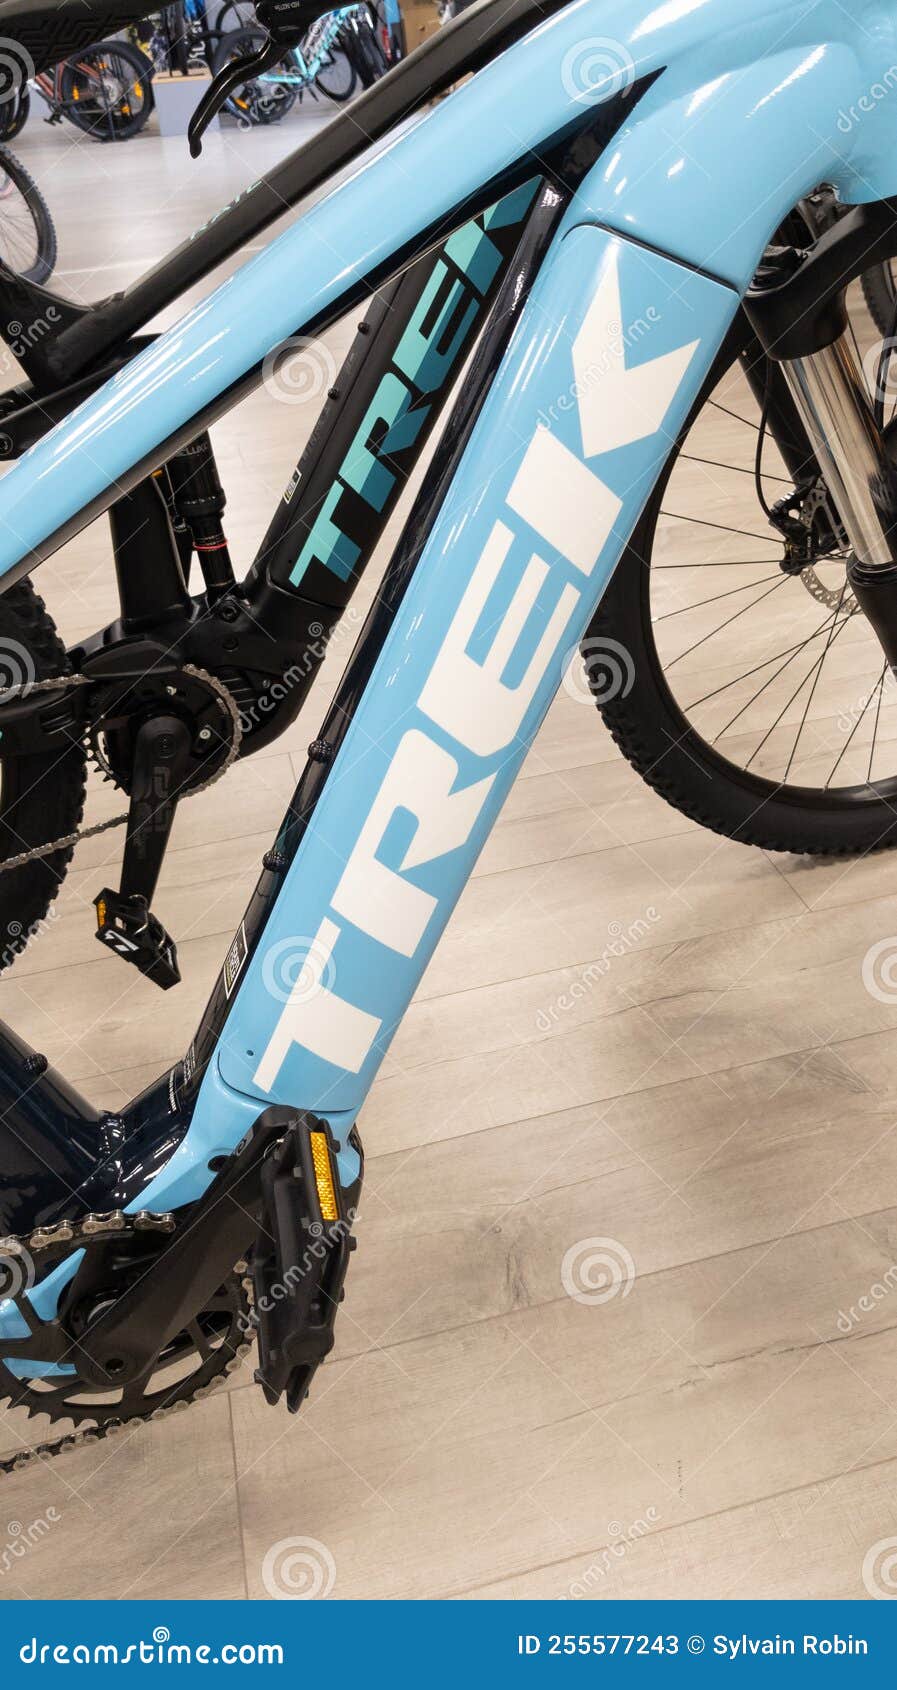 Trek Bicycle Brand Name Sign and Logo Text on Bike for Sale in Shop Editorial Stock Photo